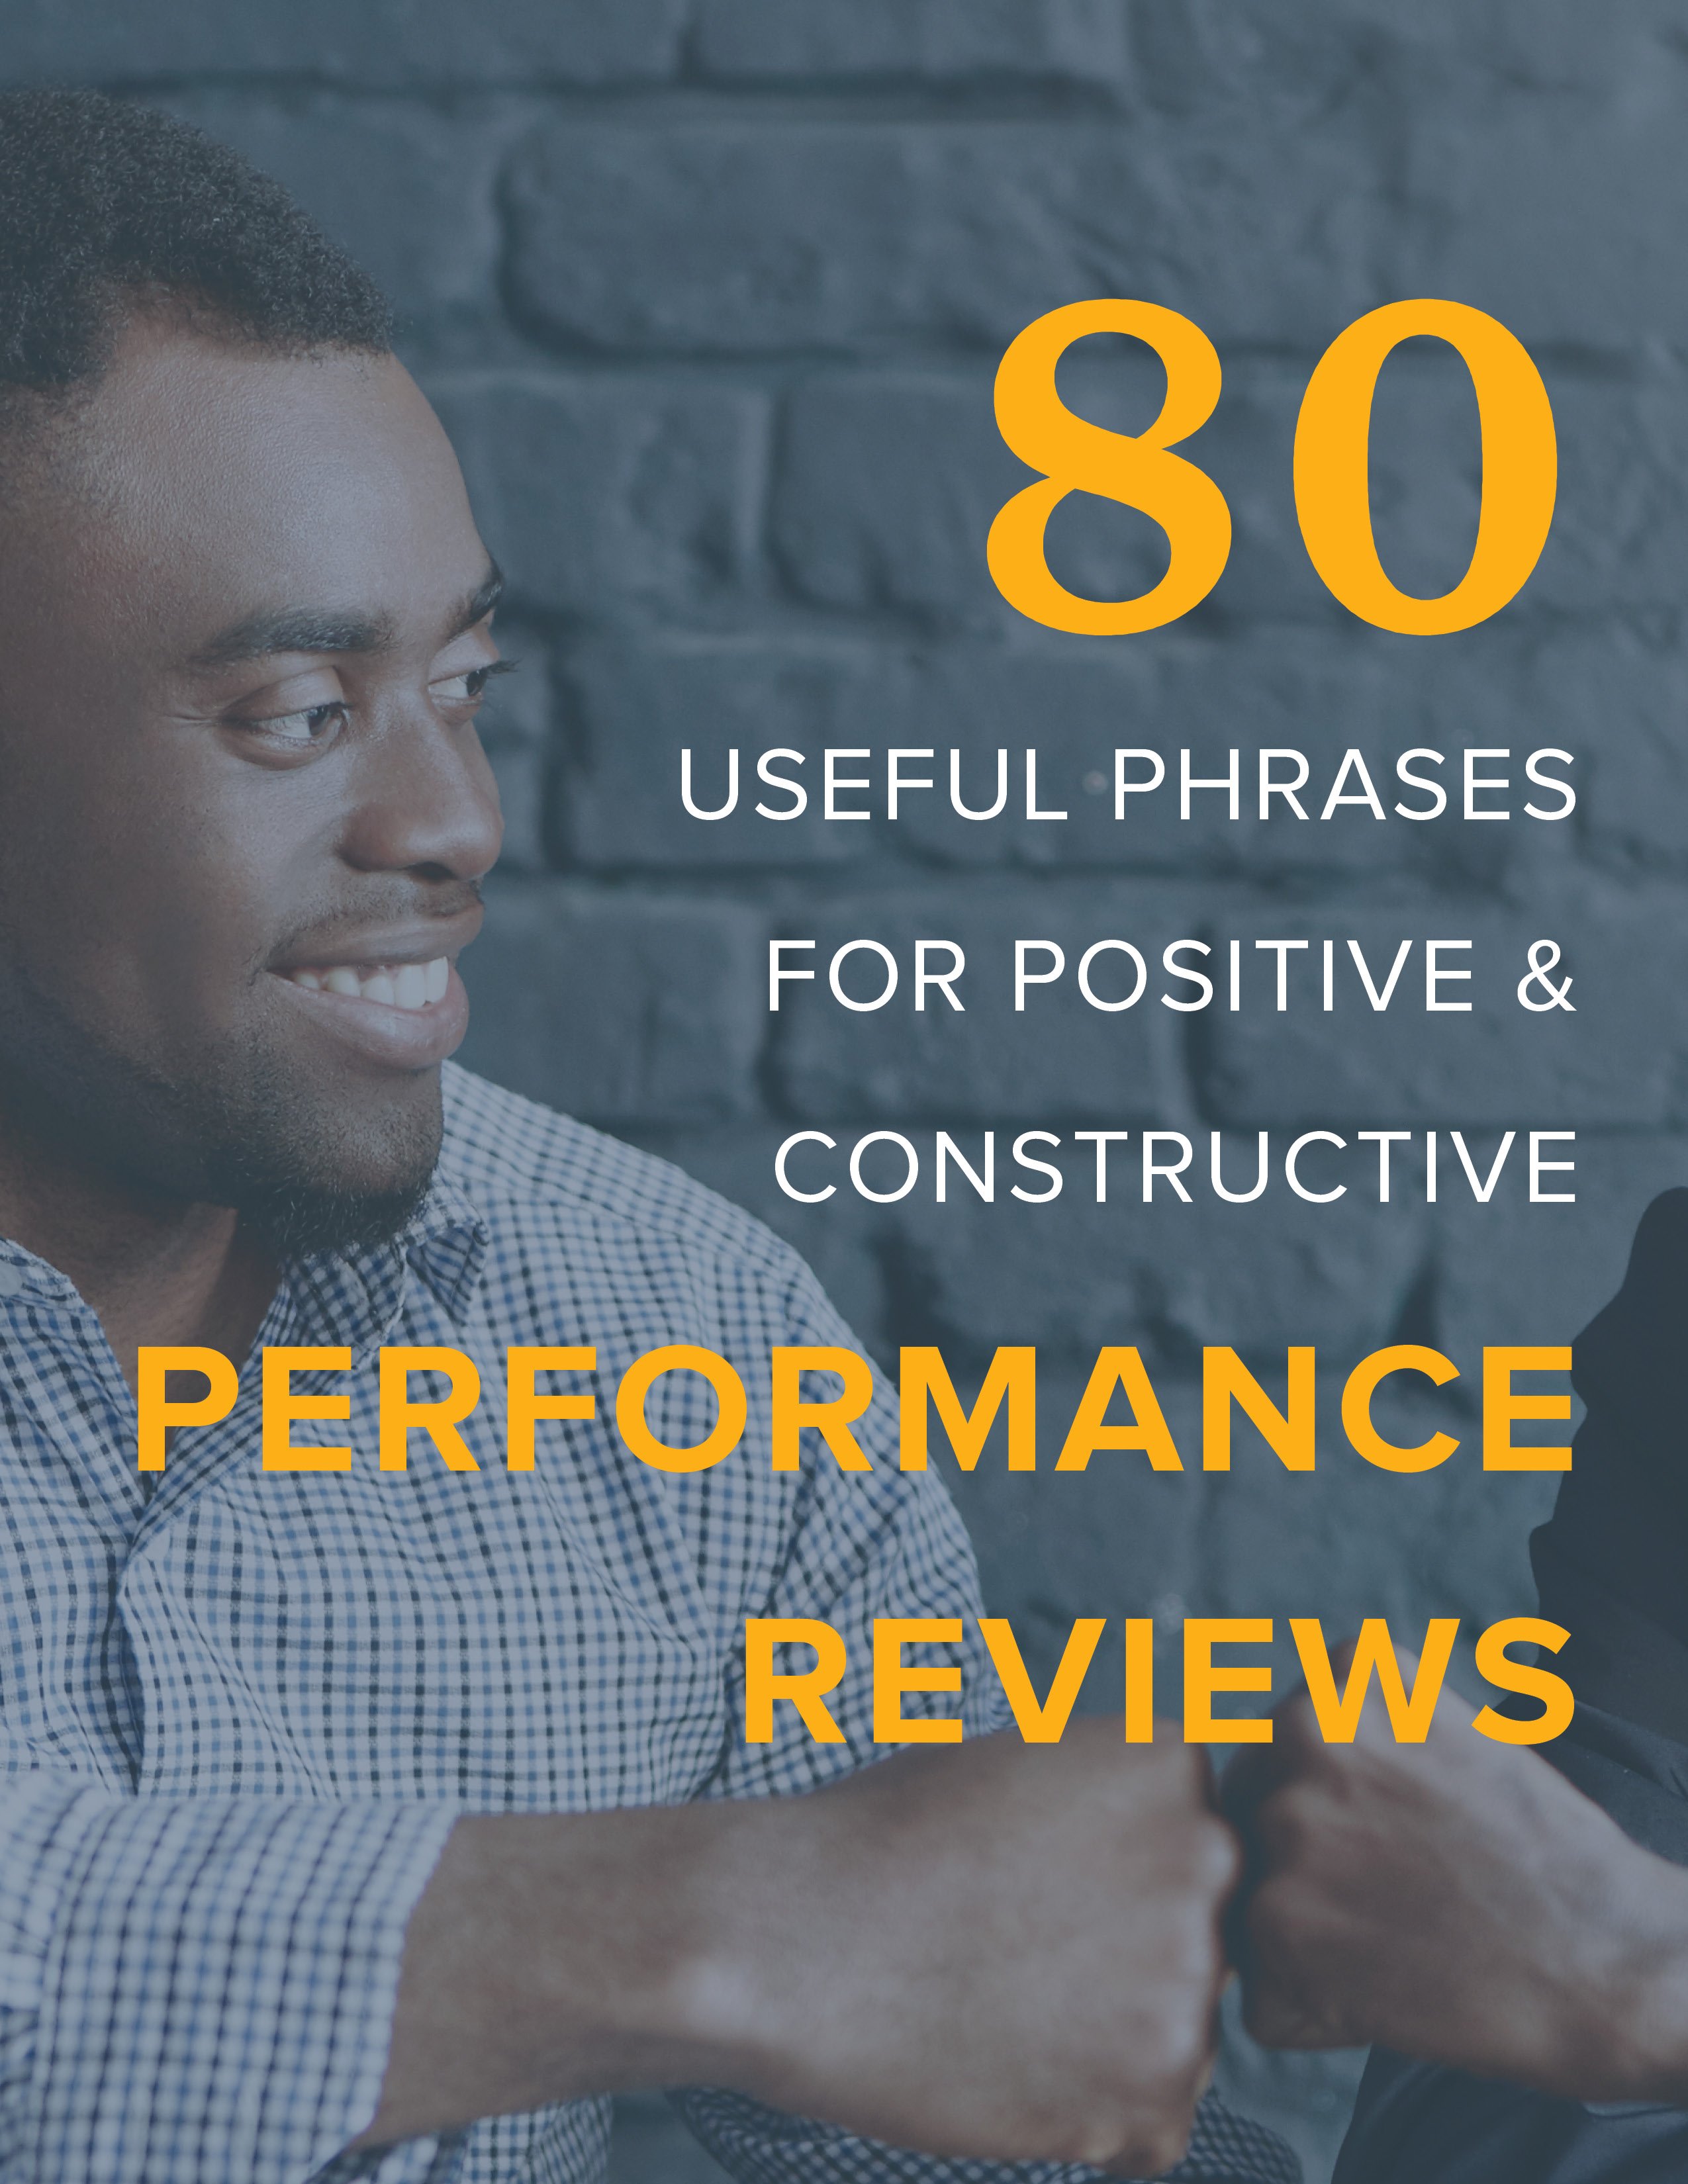 80-Useful-Phrases-Performance-Reviews